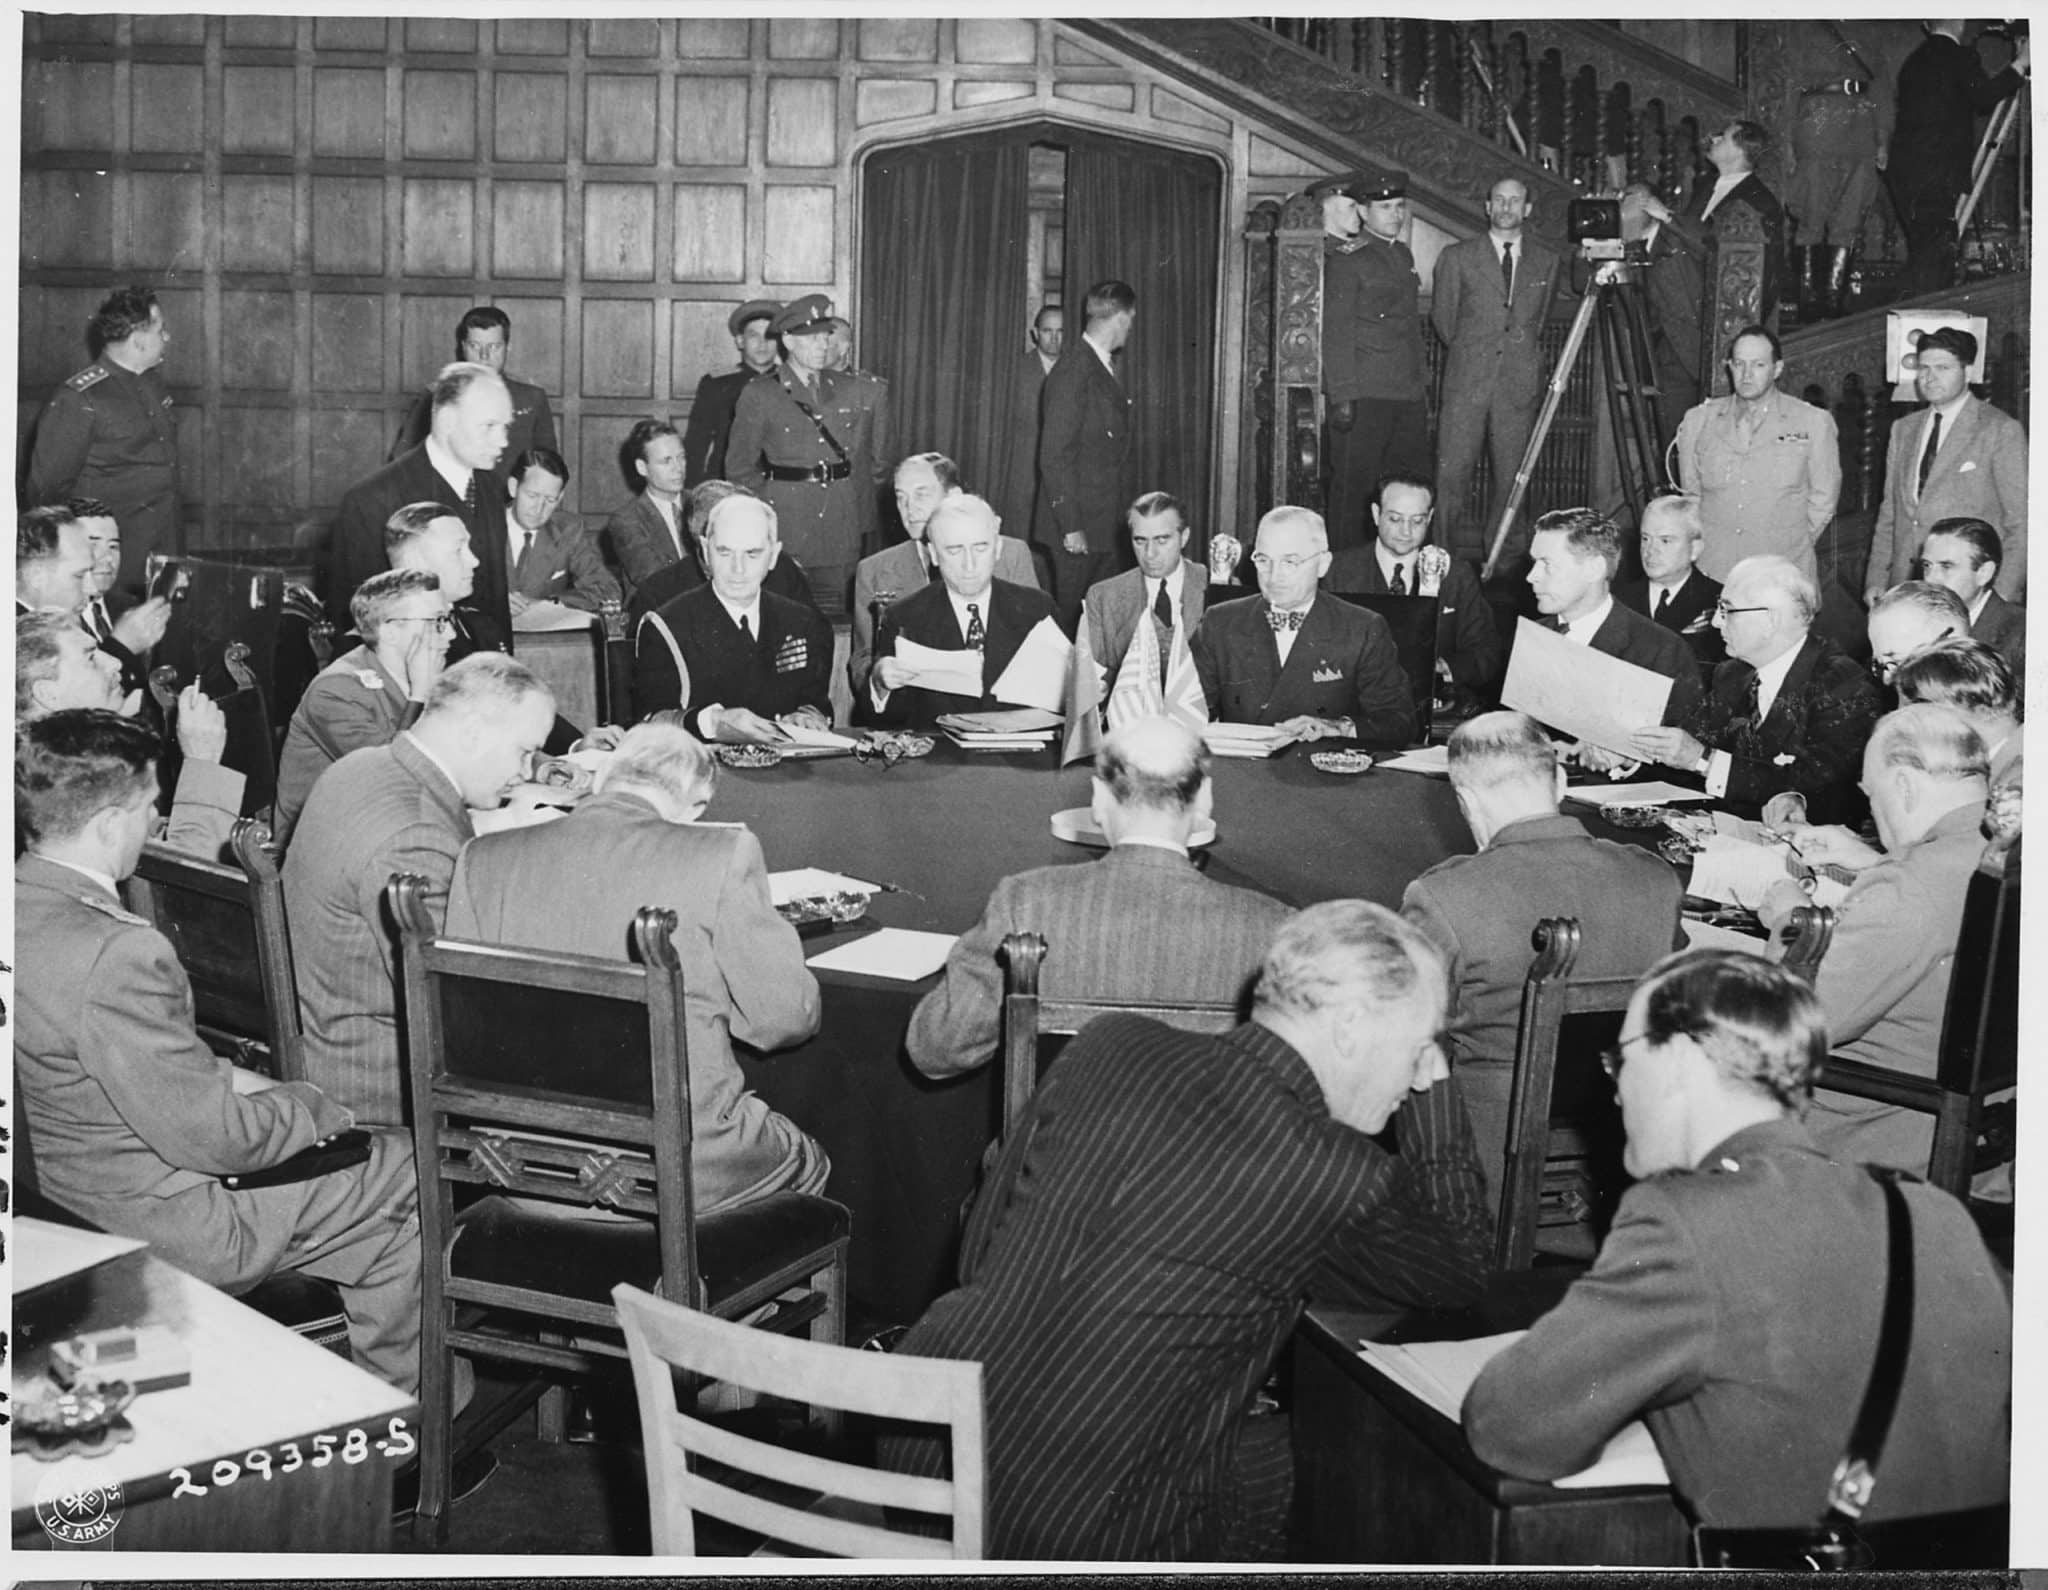 The Potsdam Conference - July 19th 1945 - Tensions would flare at the third plenary session on July 19th 1945